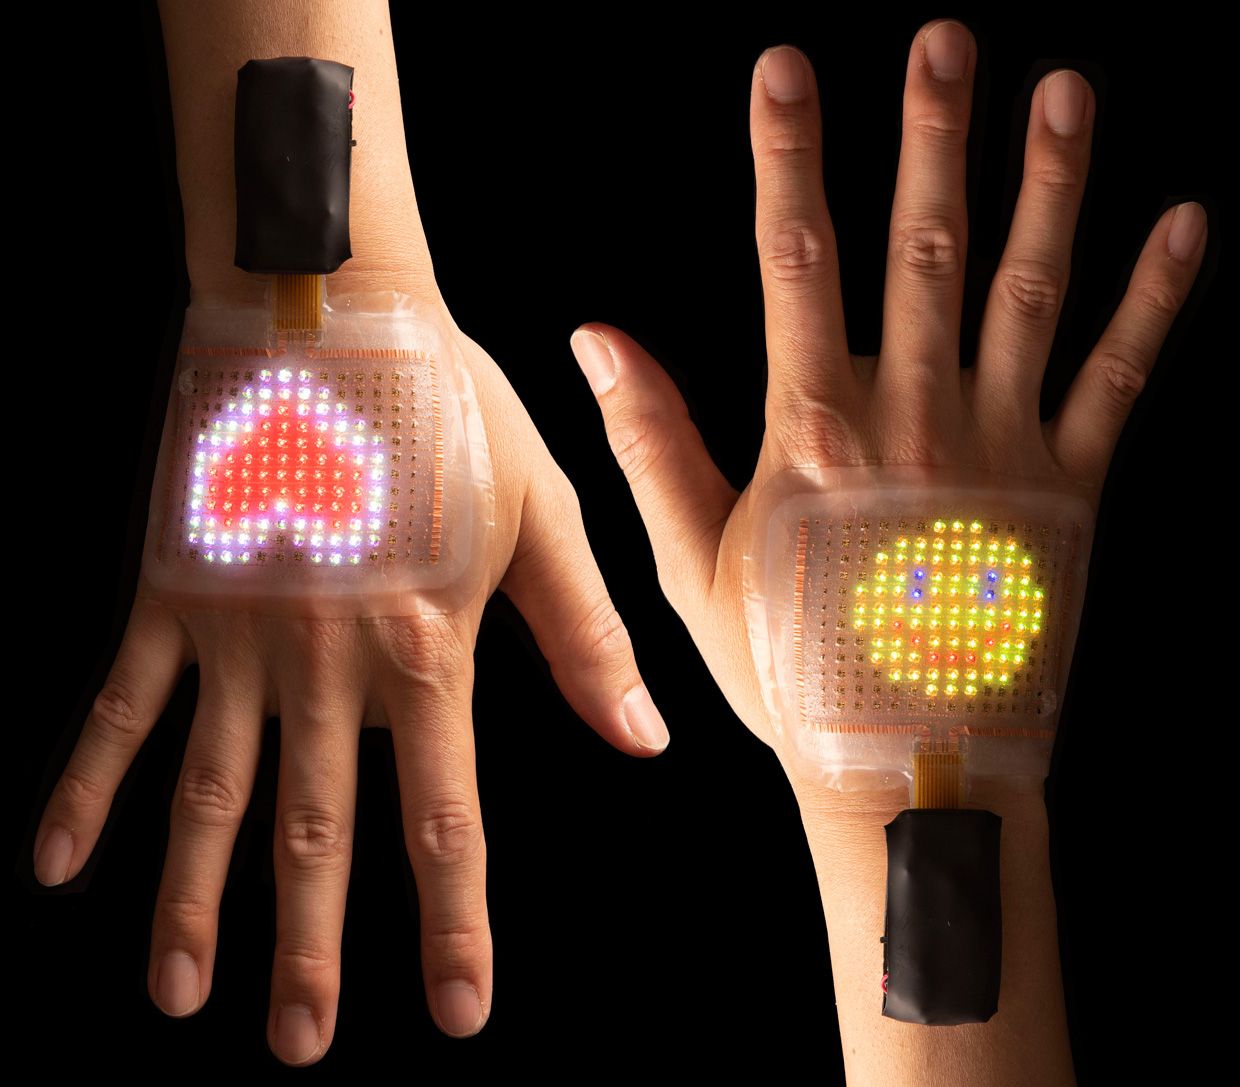 Image of two hands displaying the skin displays.